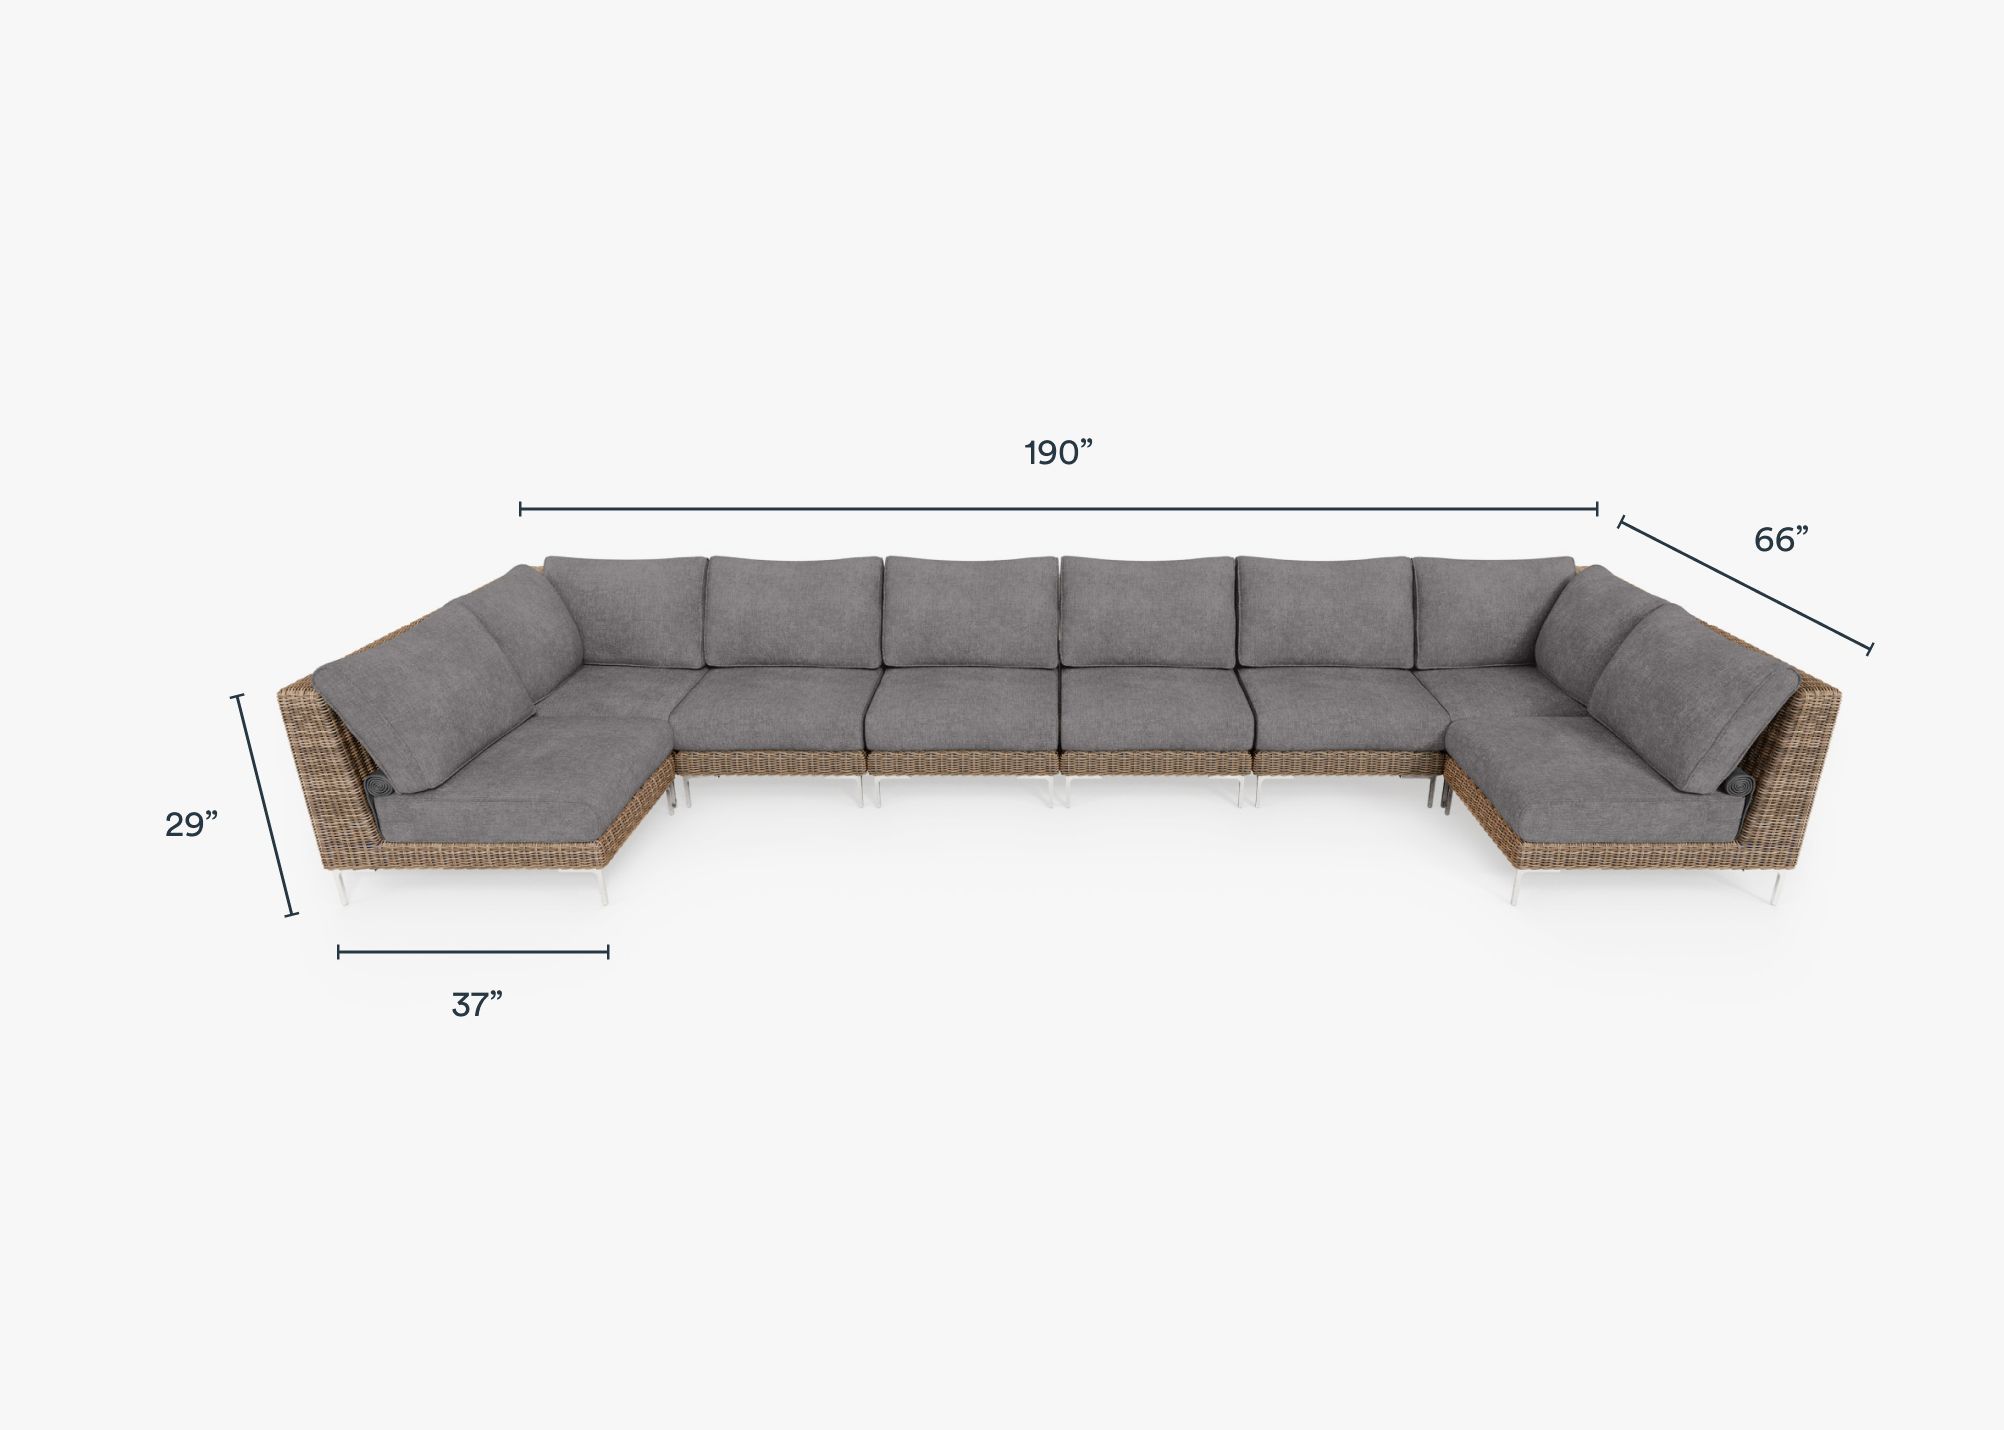 Brown Wicker Outdoor U Sectional - 8 Seat dimensions in inches, also listed under Dimensions and Weights.